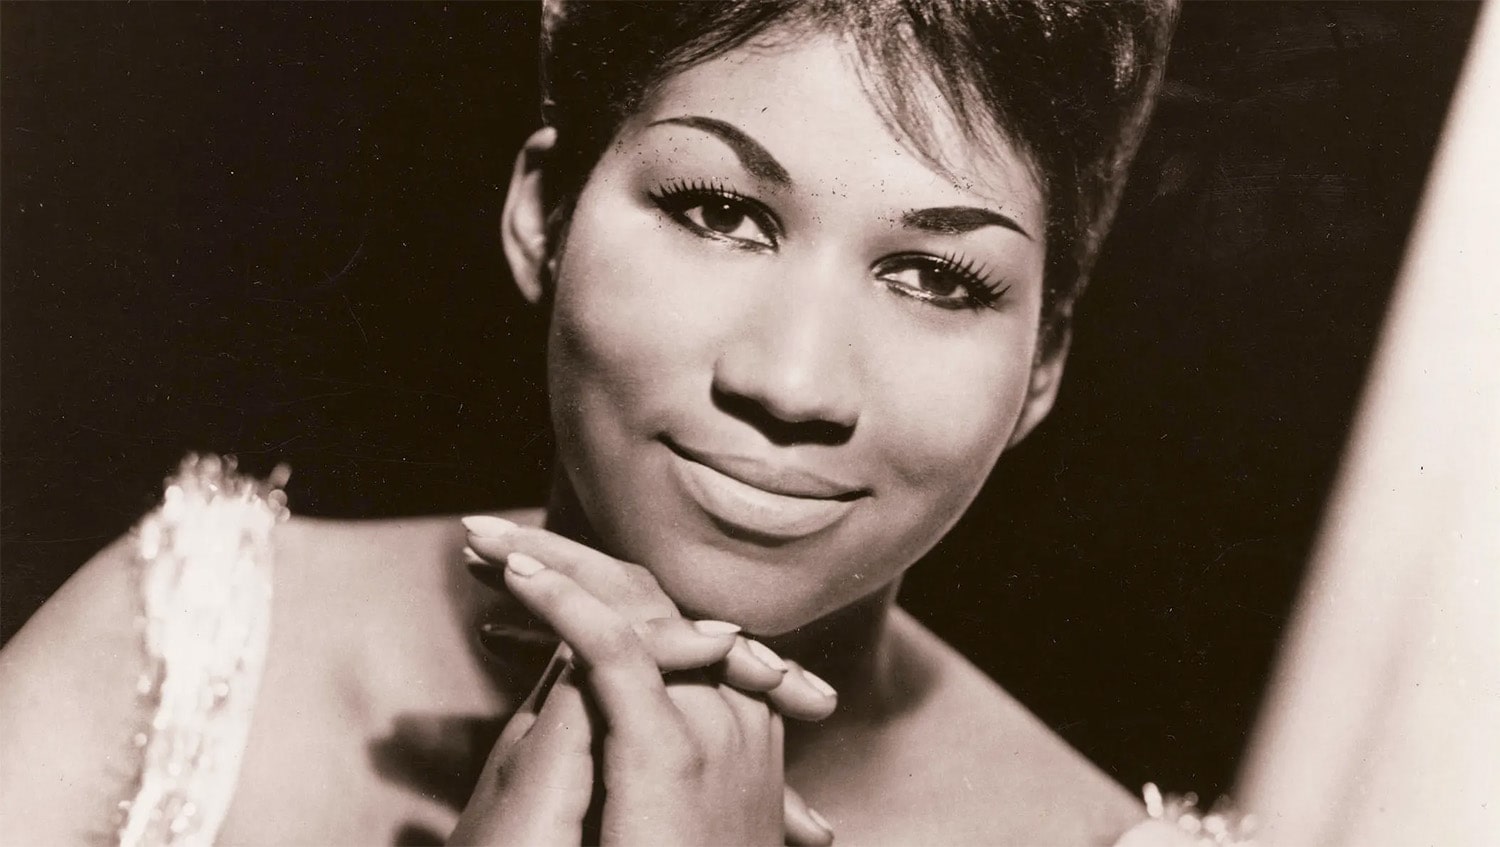 21 interesting facts about Aretha Franklin